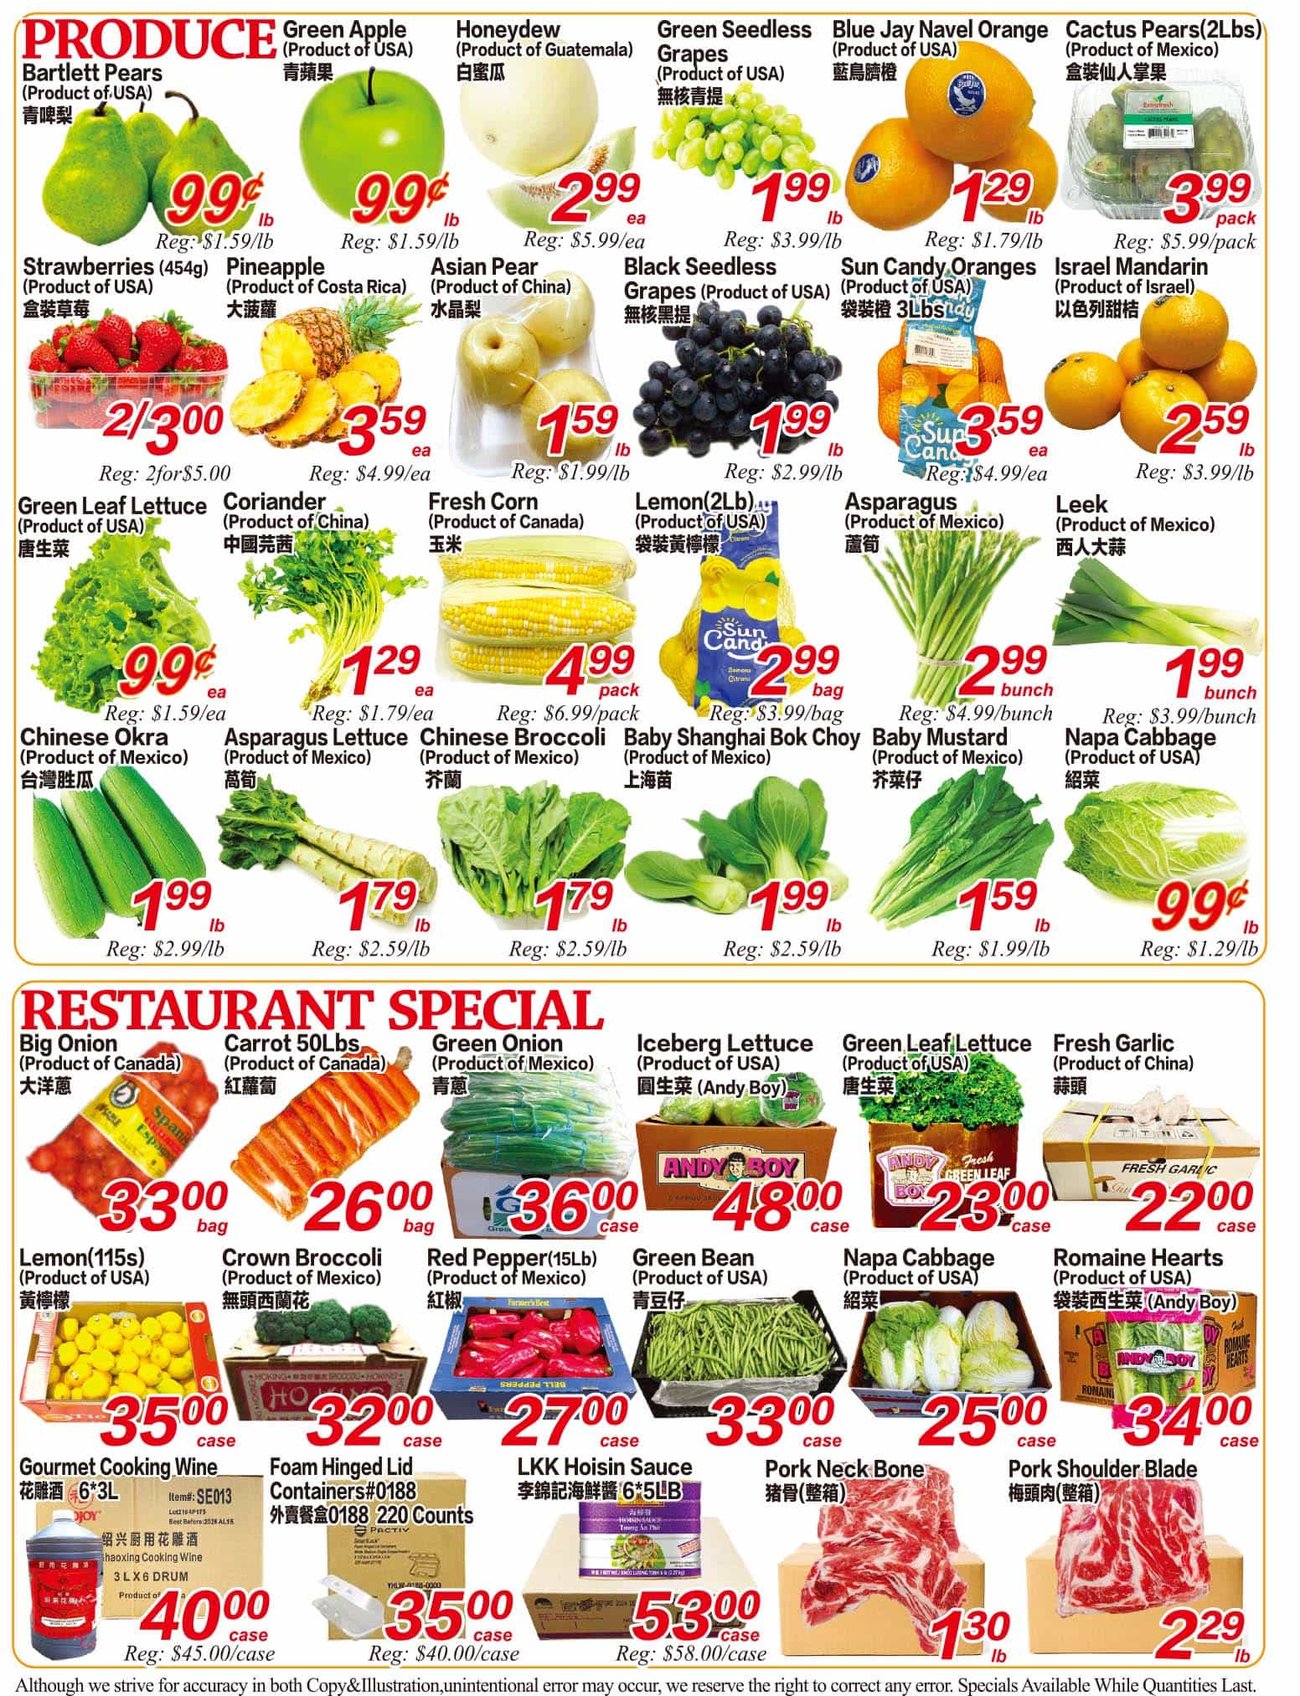 Superking Supermarket - London - Weekly Flyer Specials - Page 4